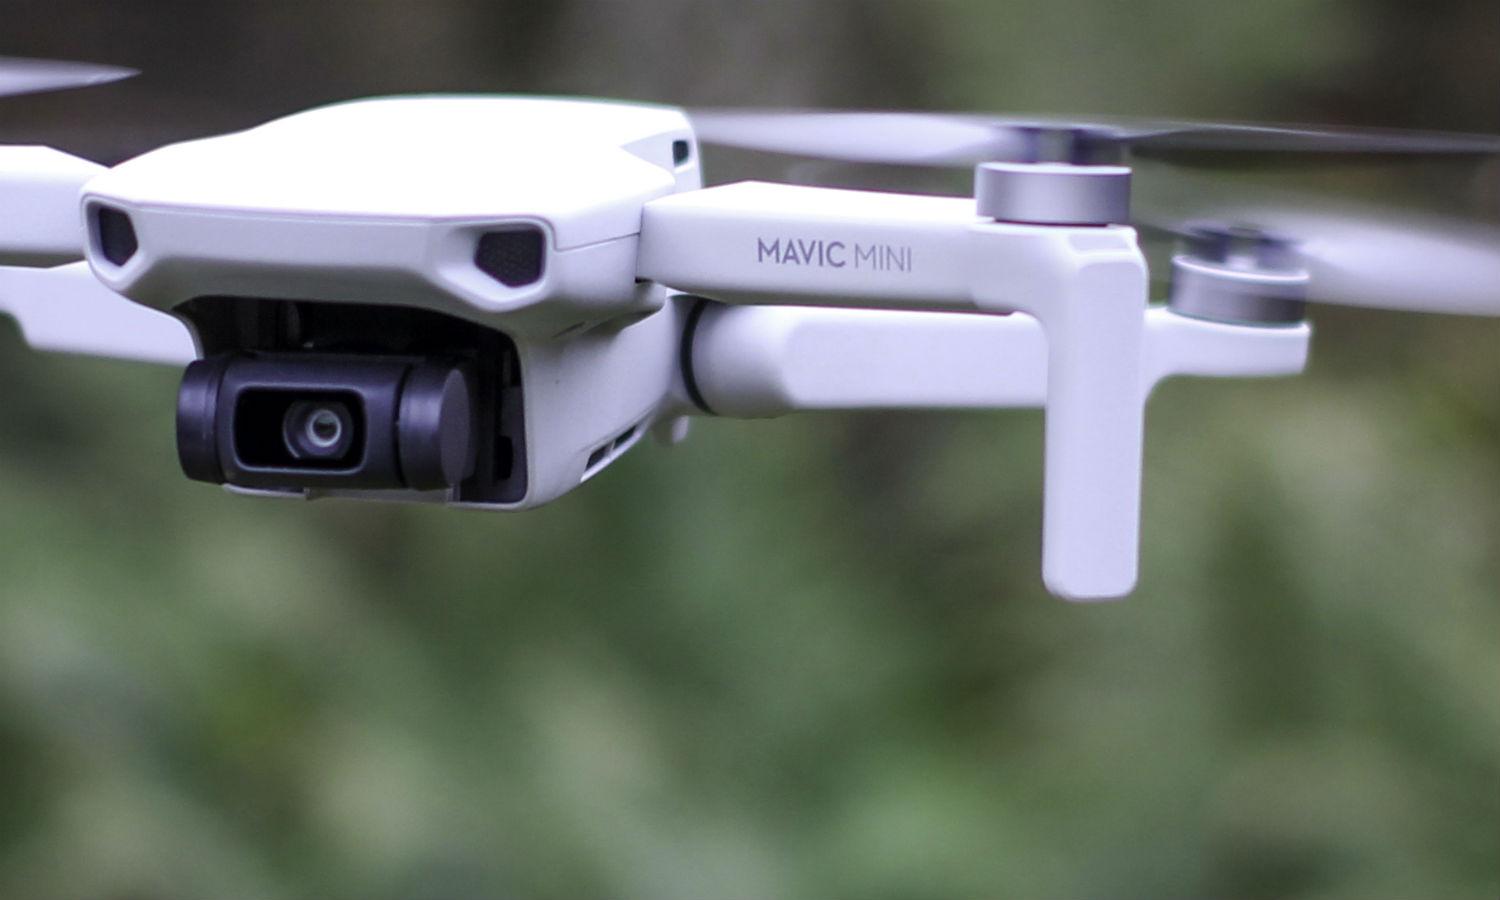 A close up of the Mavic Mini, weighing 249 grams